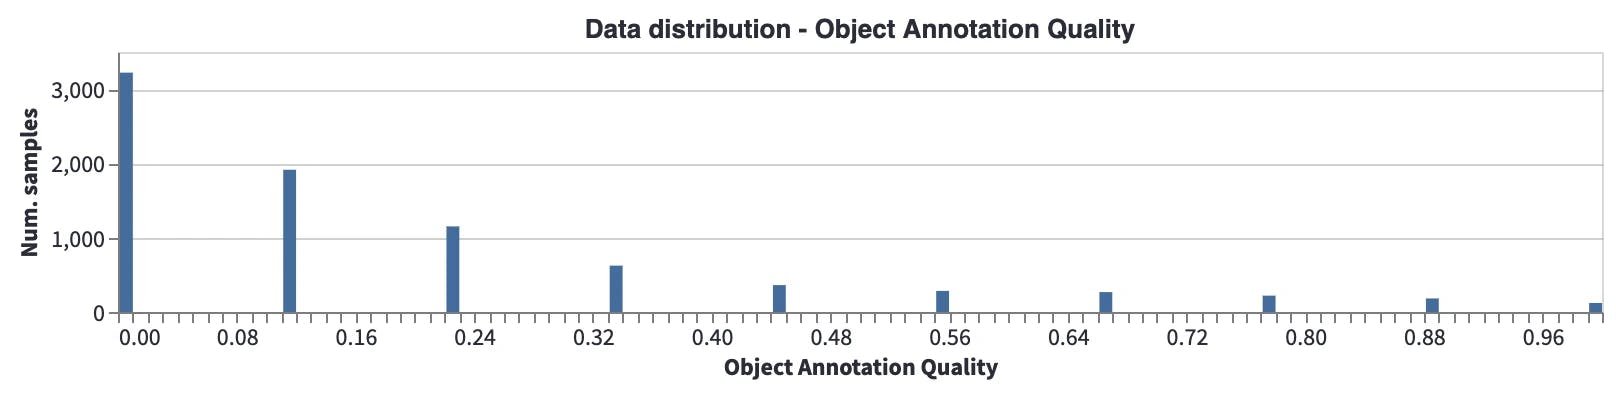 Data distribution - Object Annotation Quality (unofficial dataset)